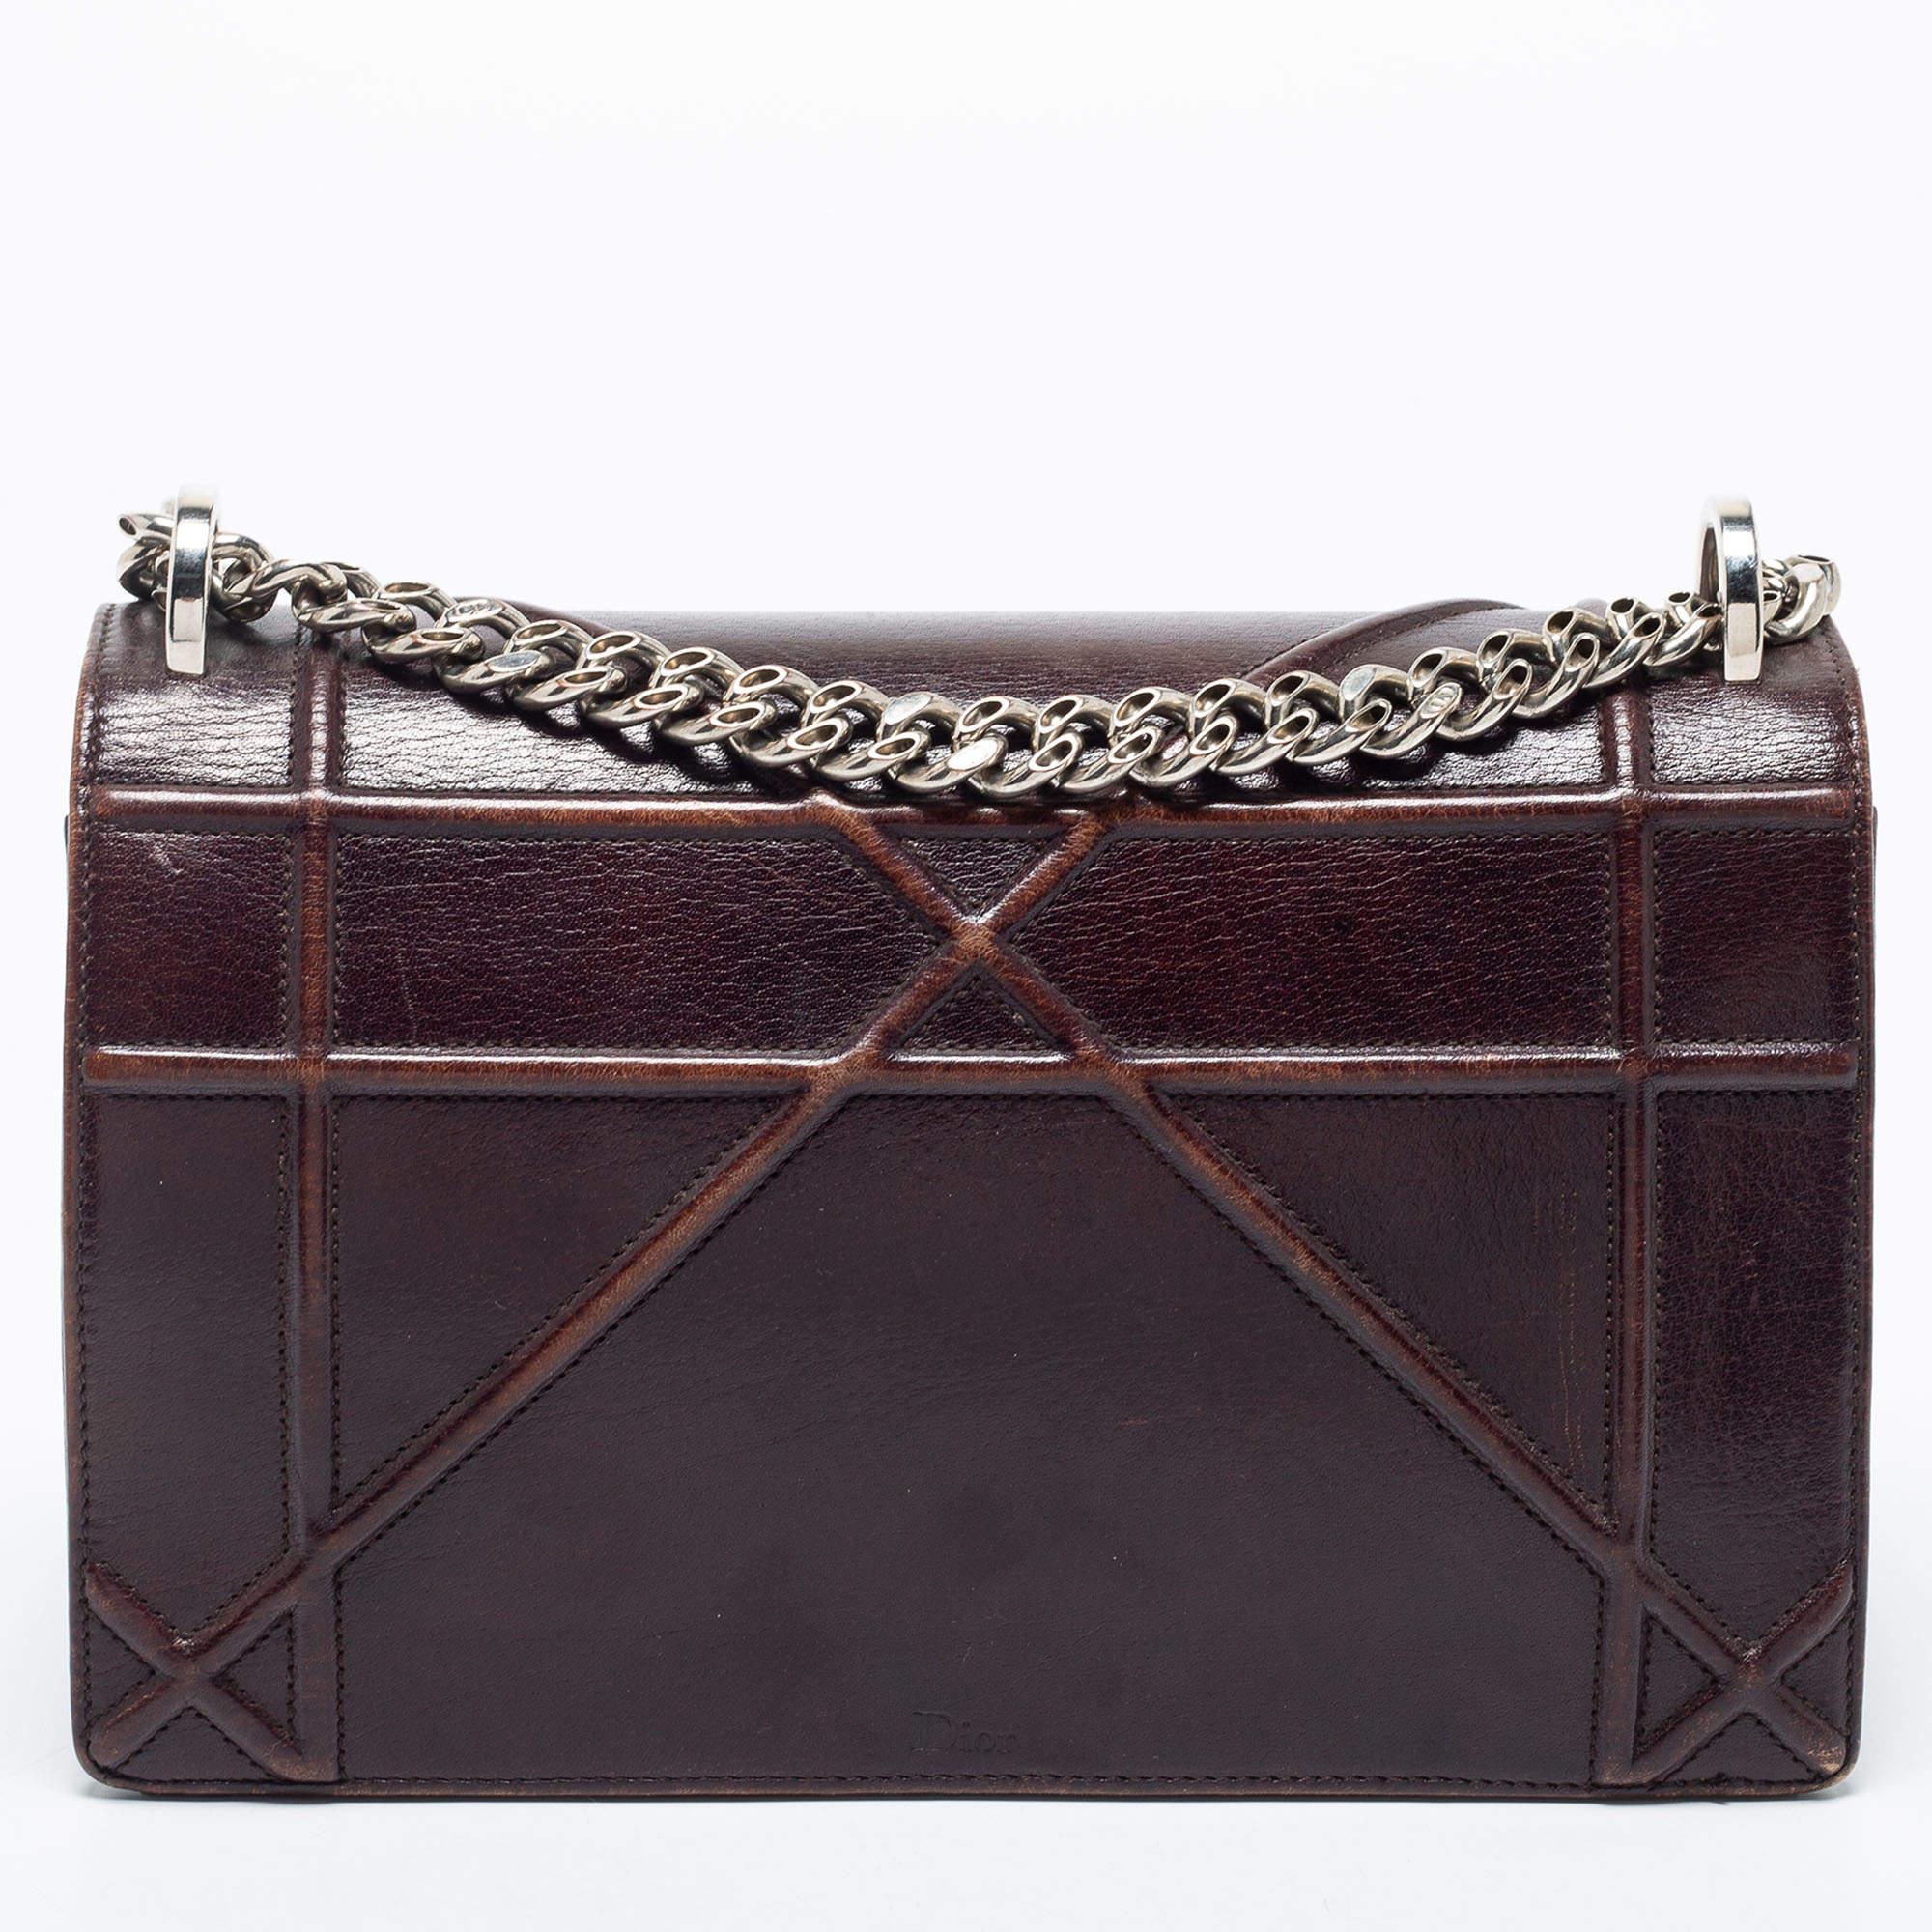 This Diorama bag has been crafted from burgundy leather into a compact design. Magnetic closure on the flap secures a lined interior, and a shoulder chain is provided for you to carry it. You will surely love parading this beauty.

